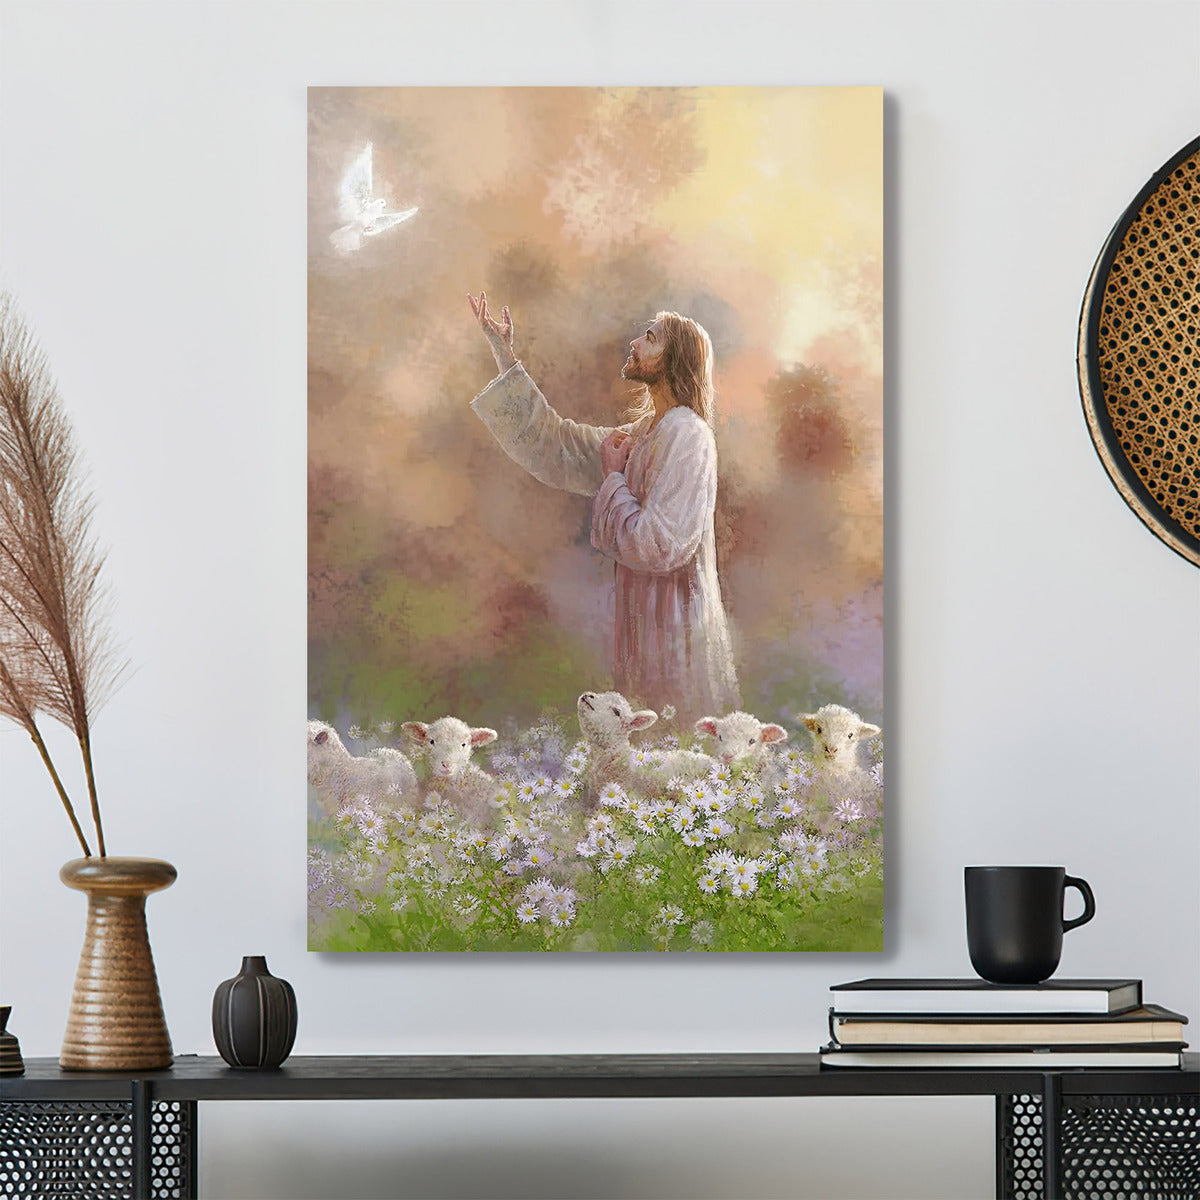 Prince of Peace - Sheep - Jesus Wall Pictures - Jesus Canvas Painting - Jesus Poster - Jesus Canvas - Christian Gift - Ciaocustom